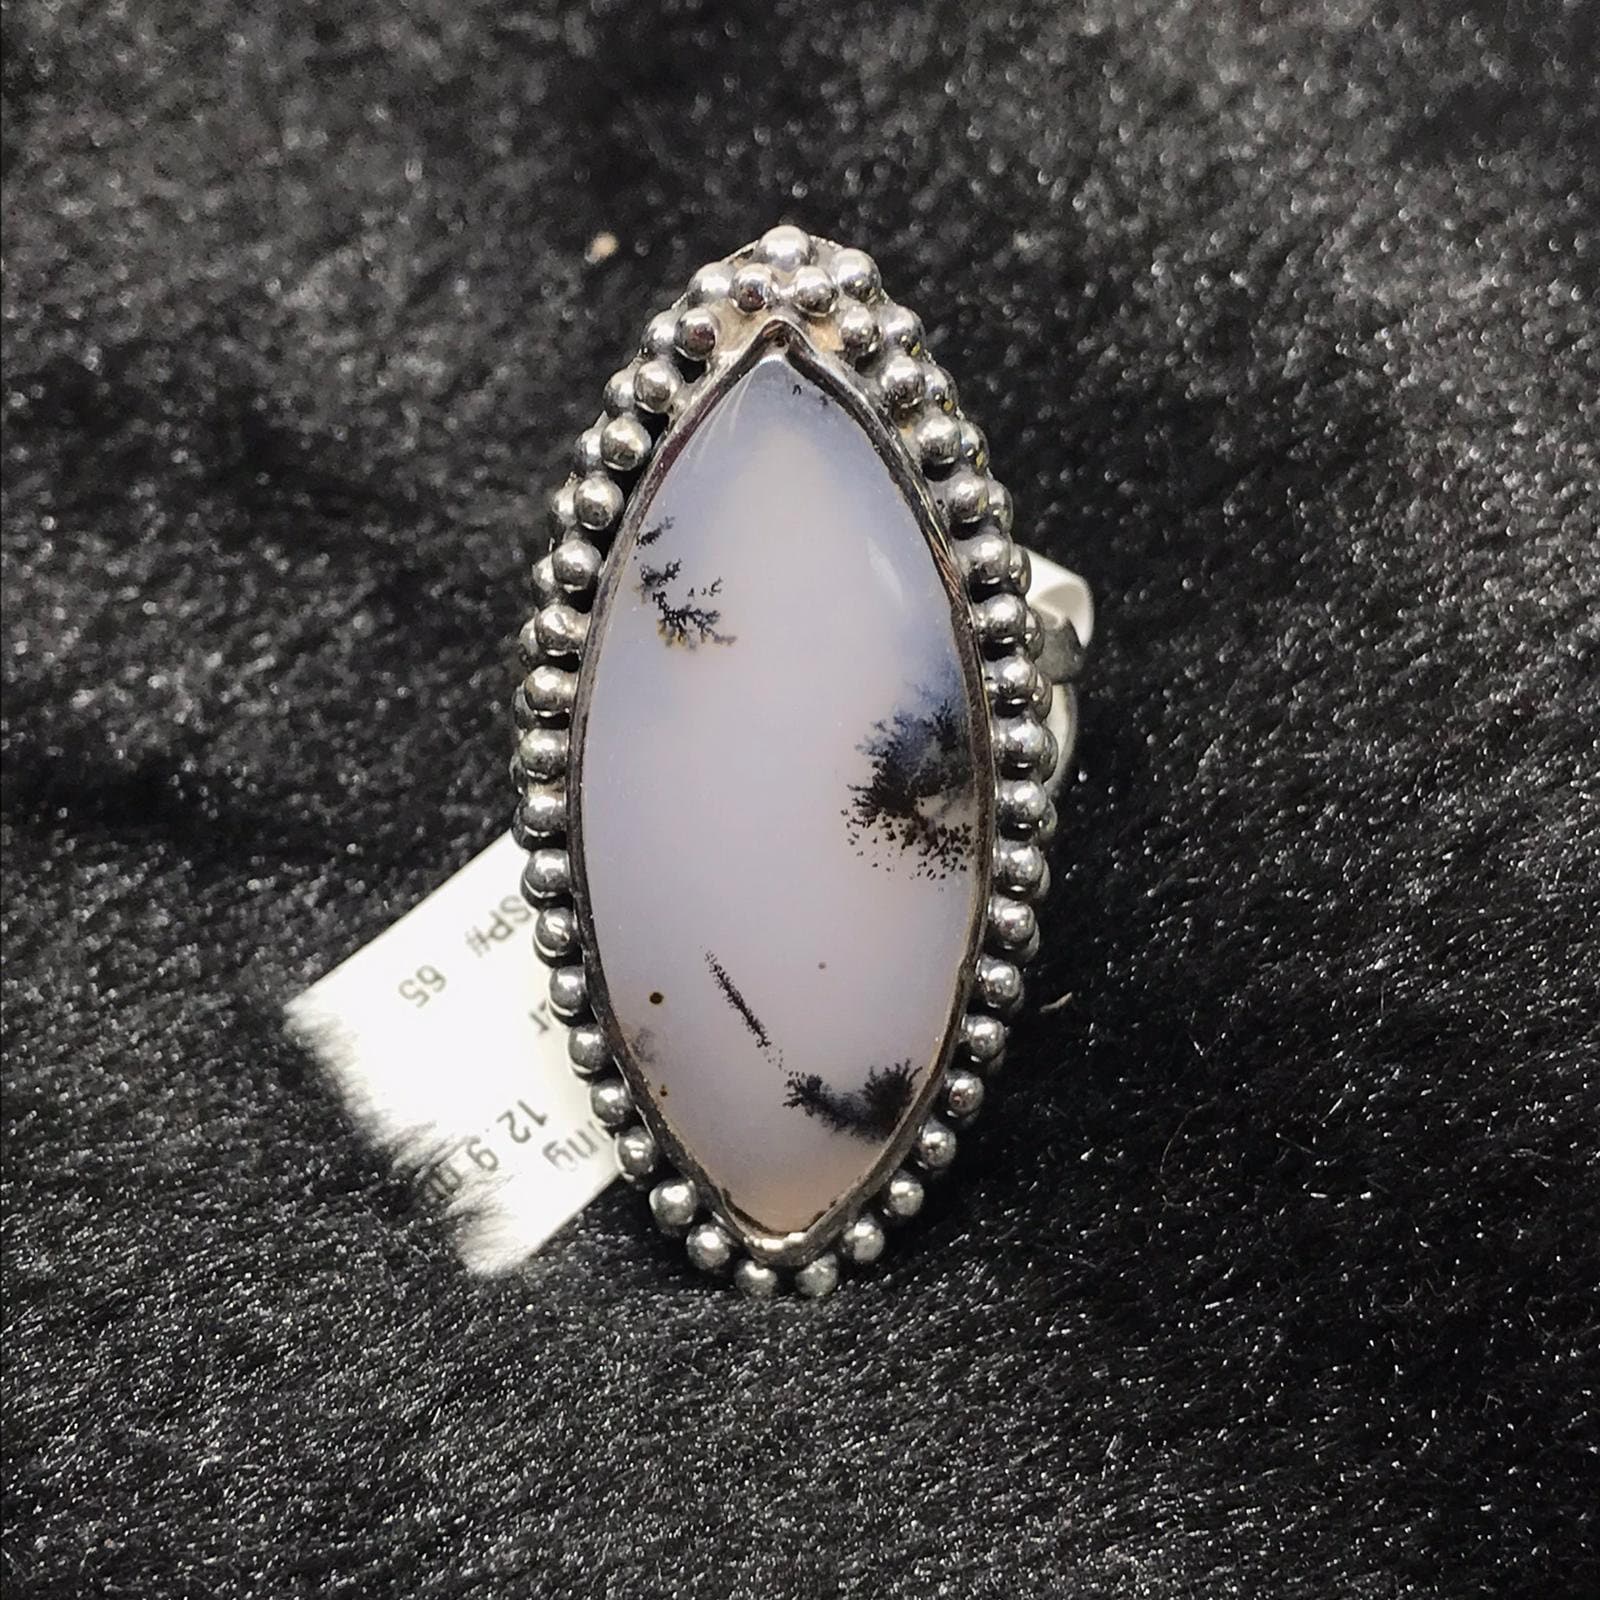 Dendrite Opal Ring 9 Us , 925 Sterling Silver, Handmade Ring, Statement Birthstone Fashion #hh20-24 Mothers Day